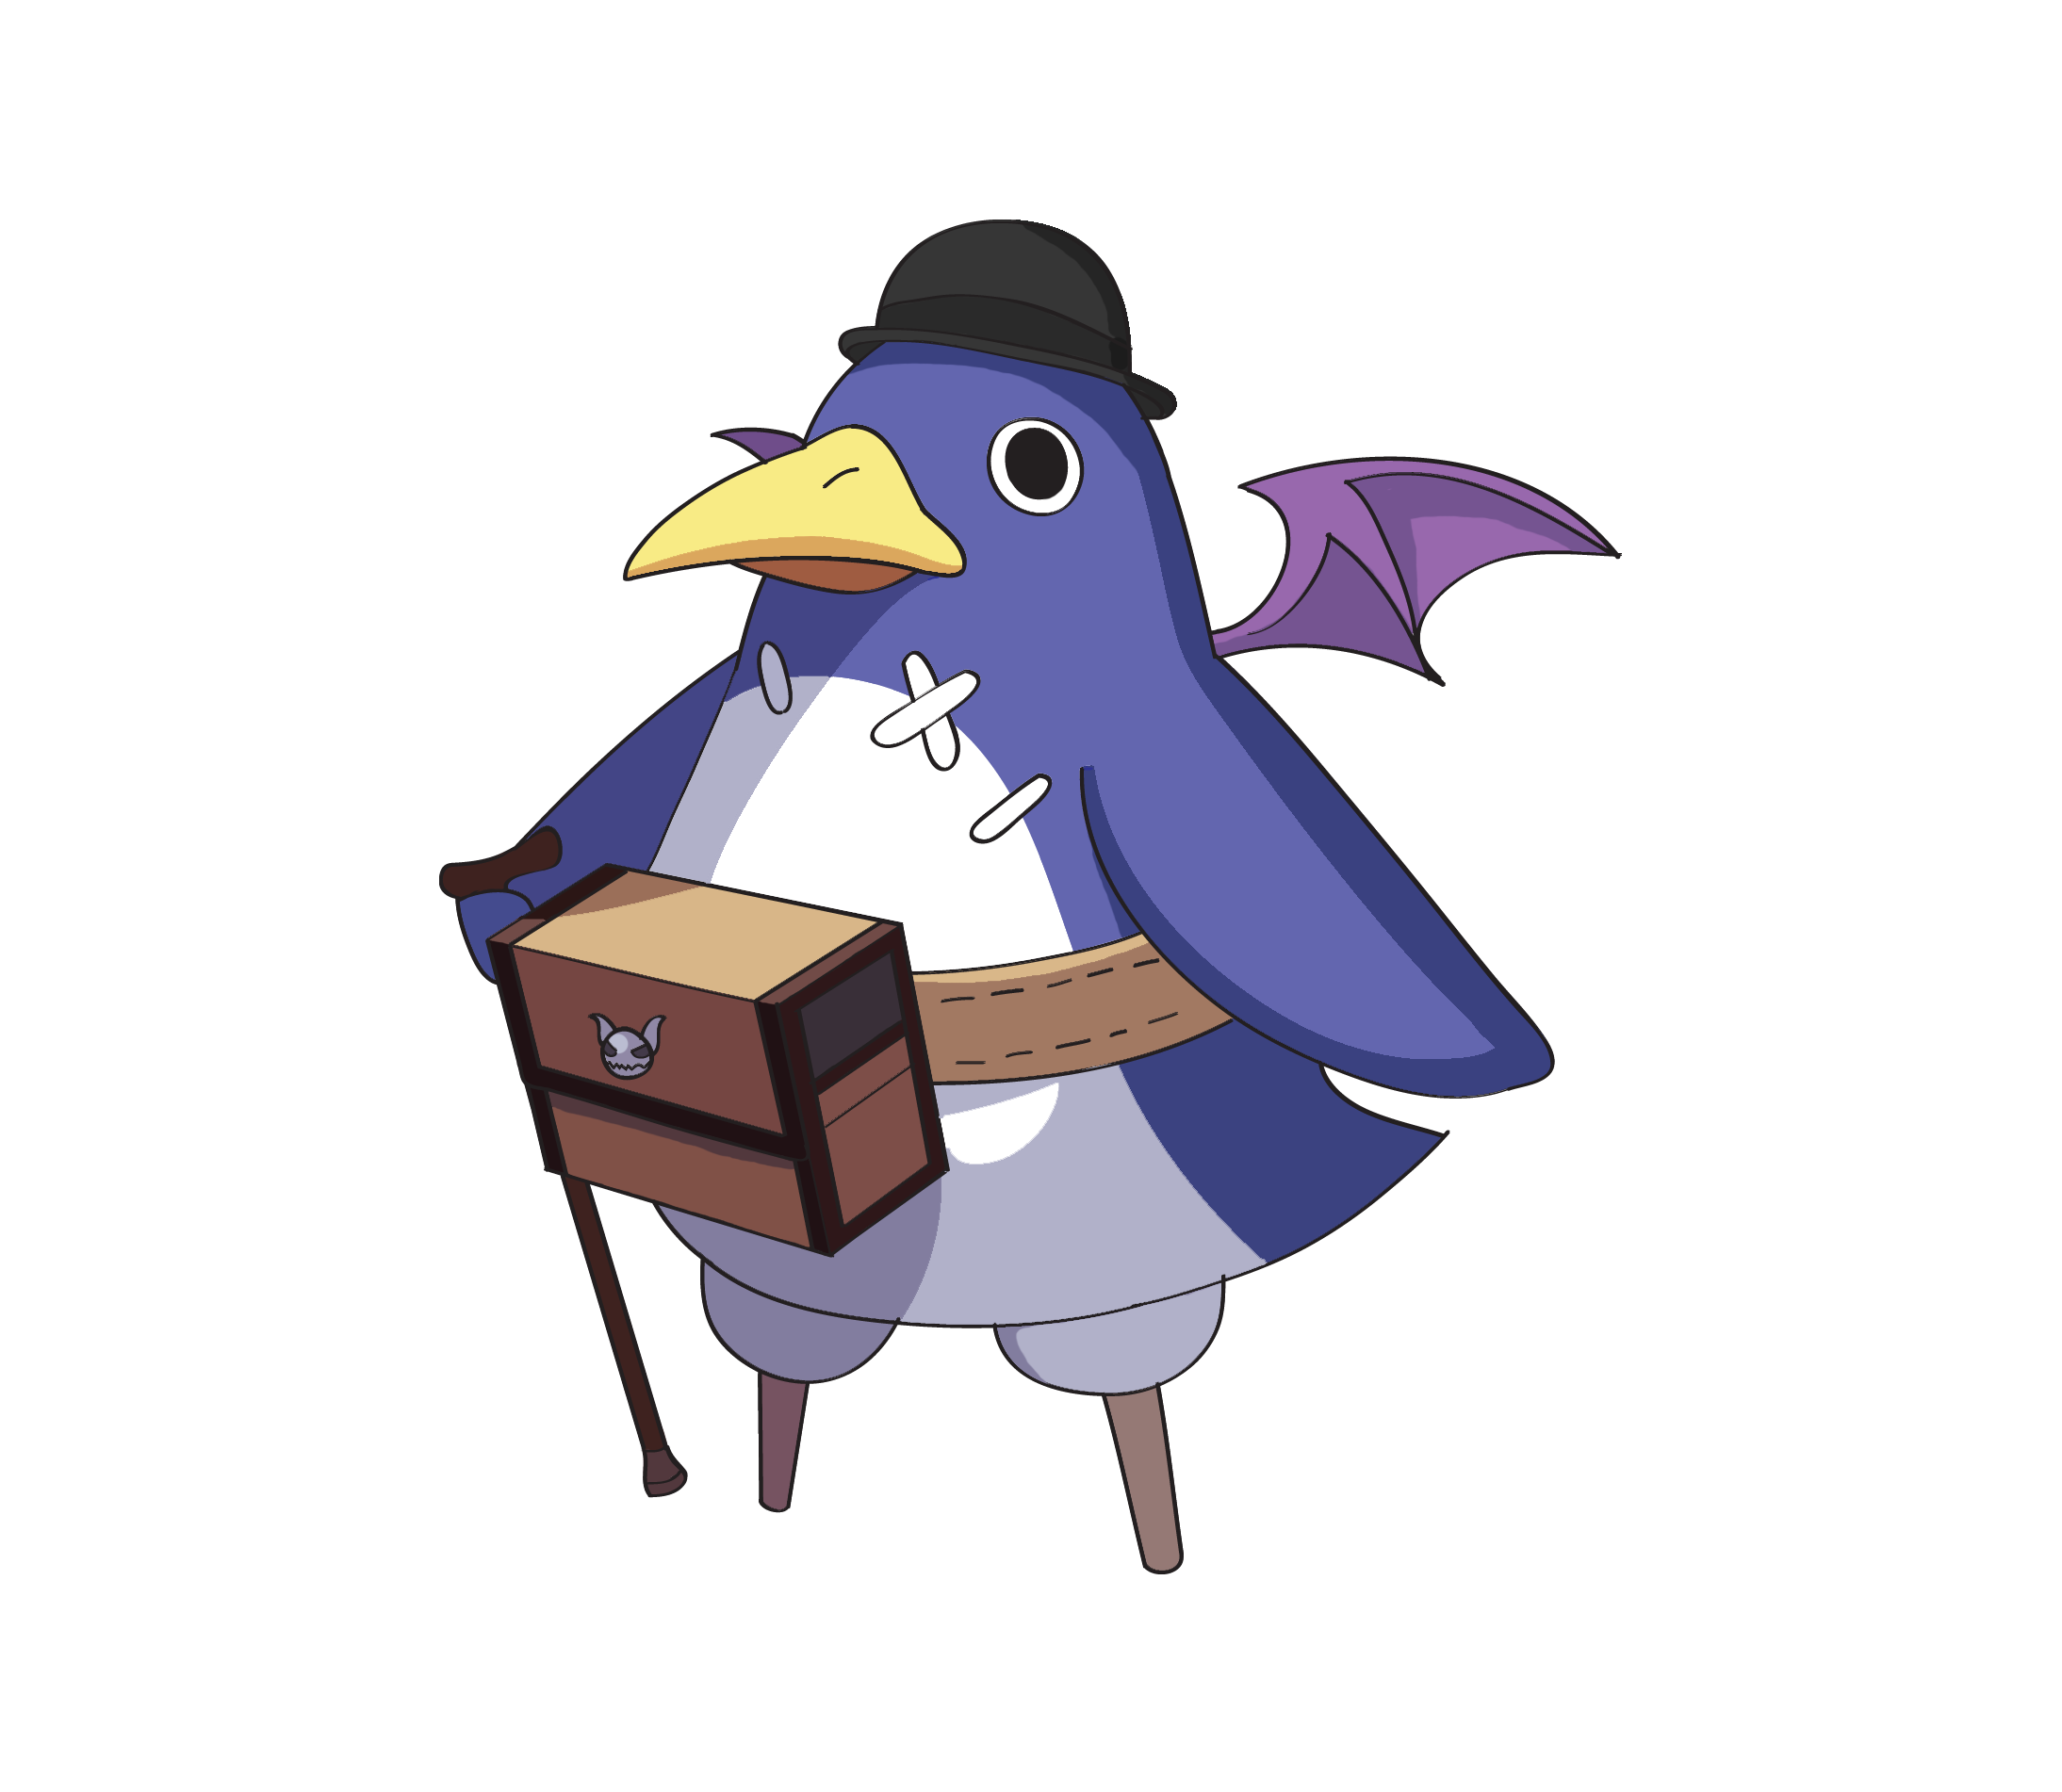 the_wise_prinny_by_stelar_eclipse-d64kddy.png